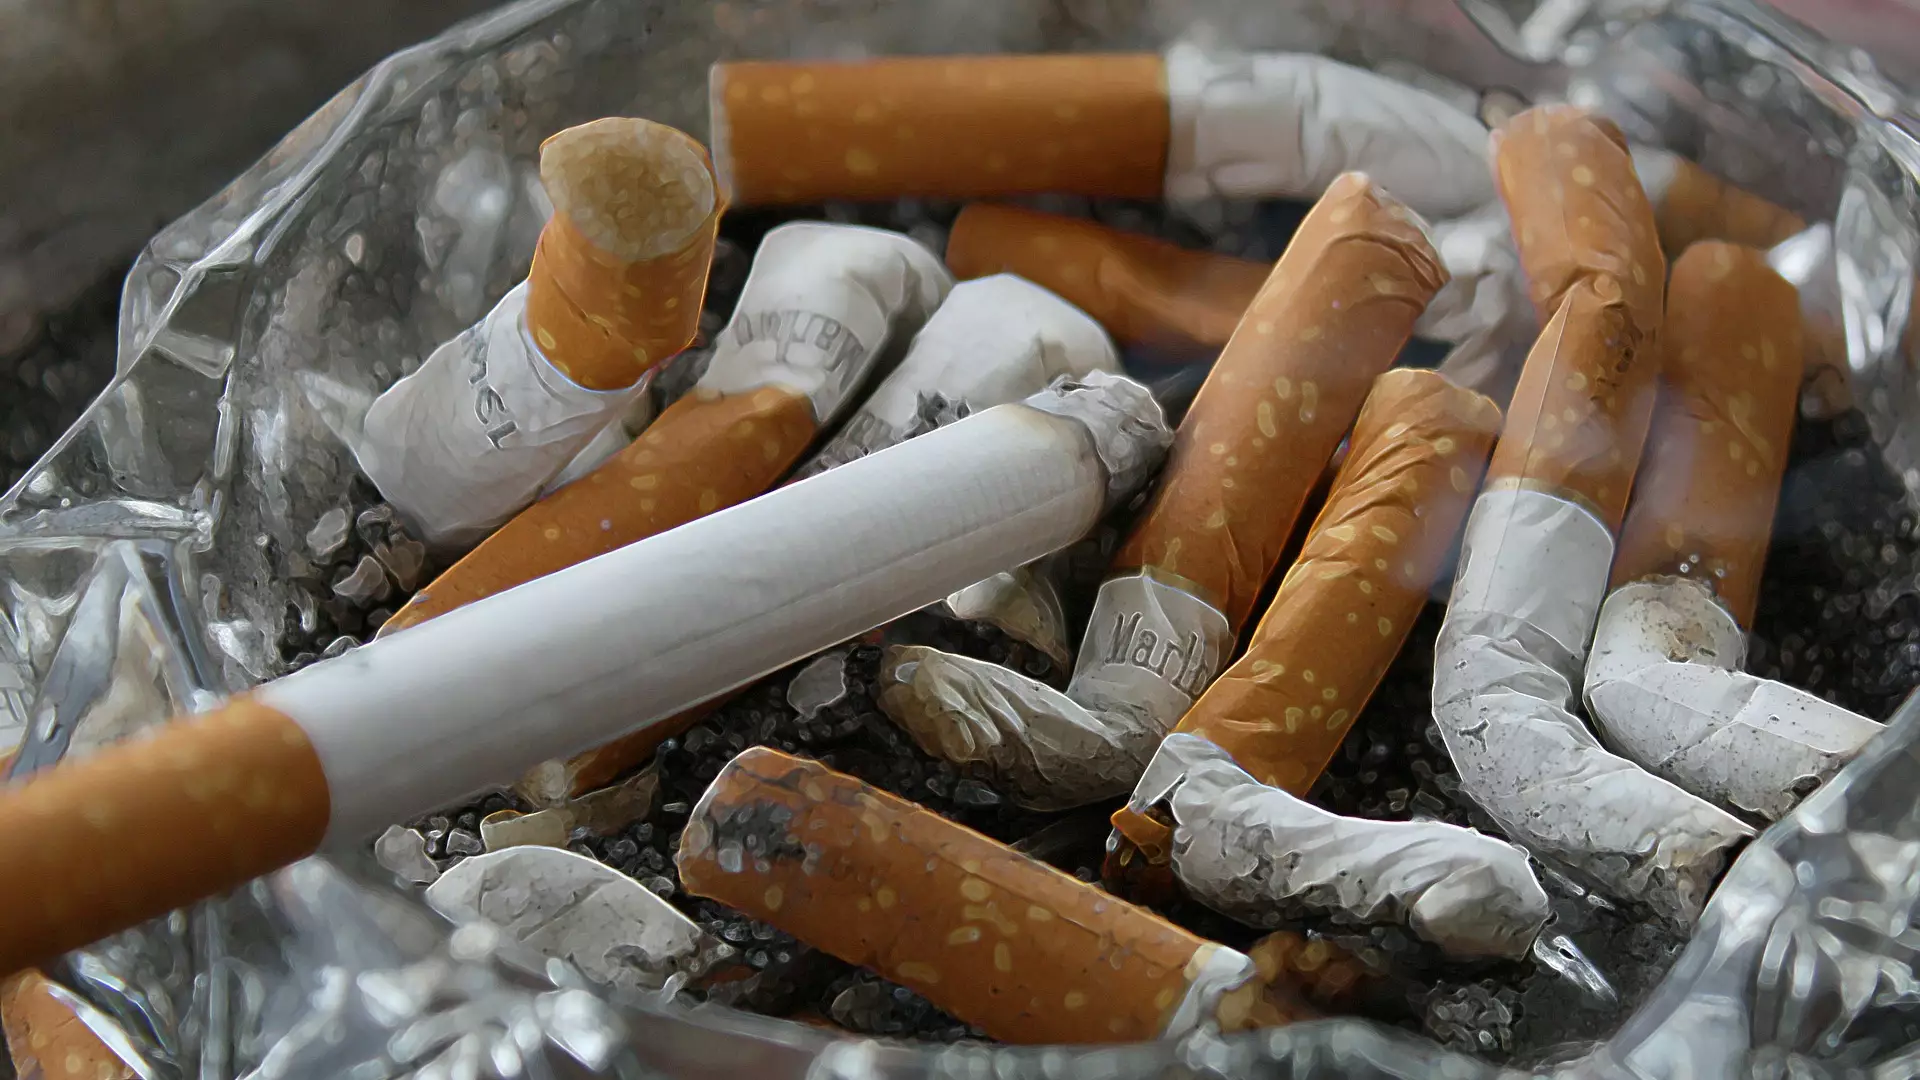 Cancer Warnings To Be Printed On Every Single Cigarette In Canada